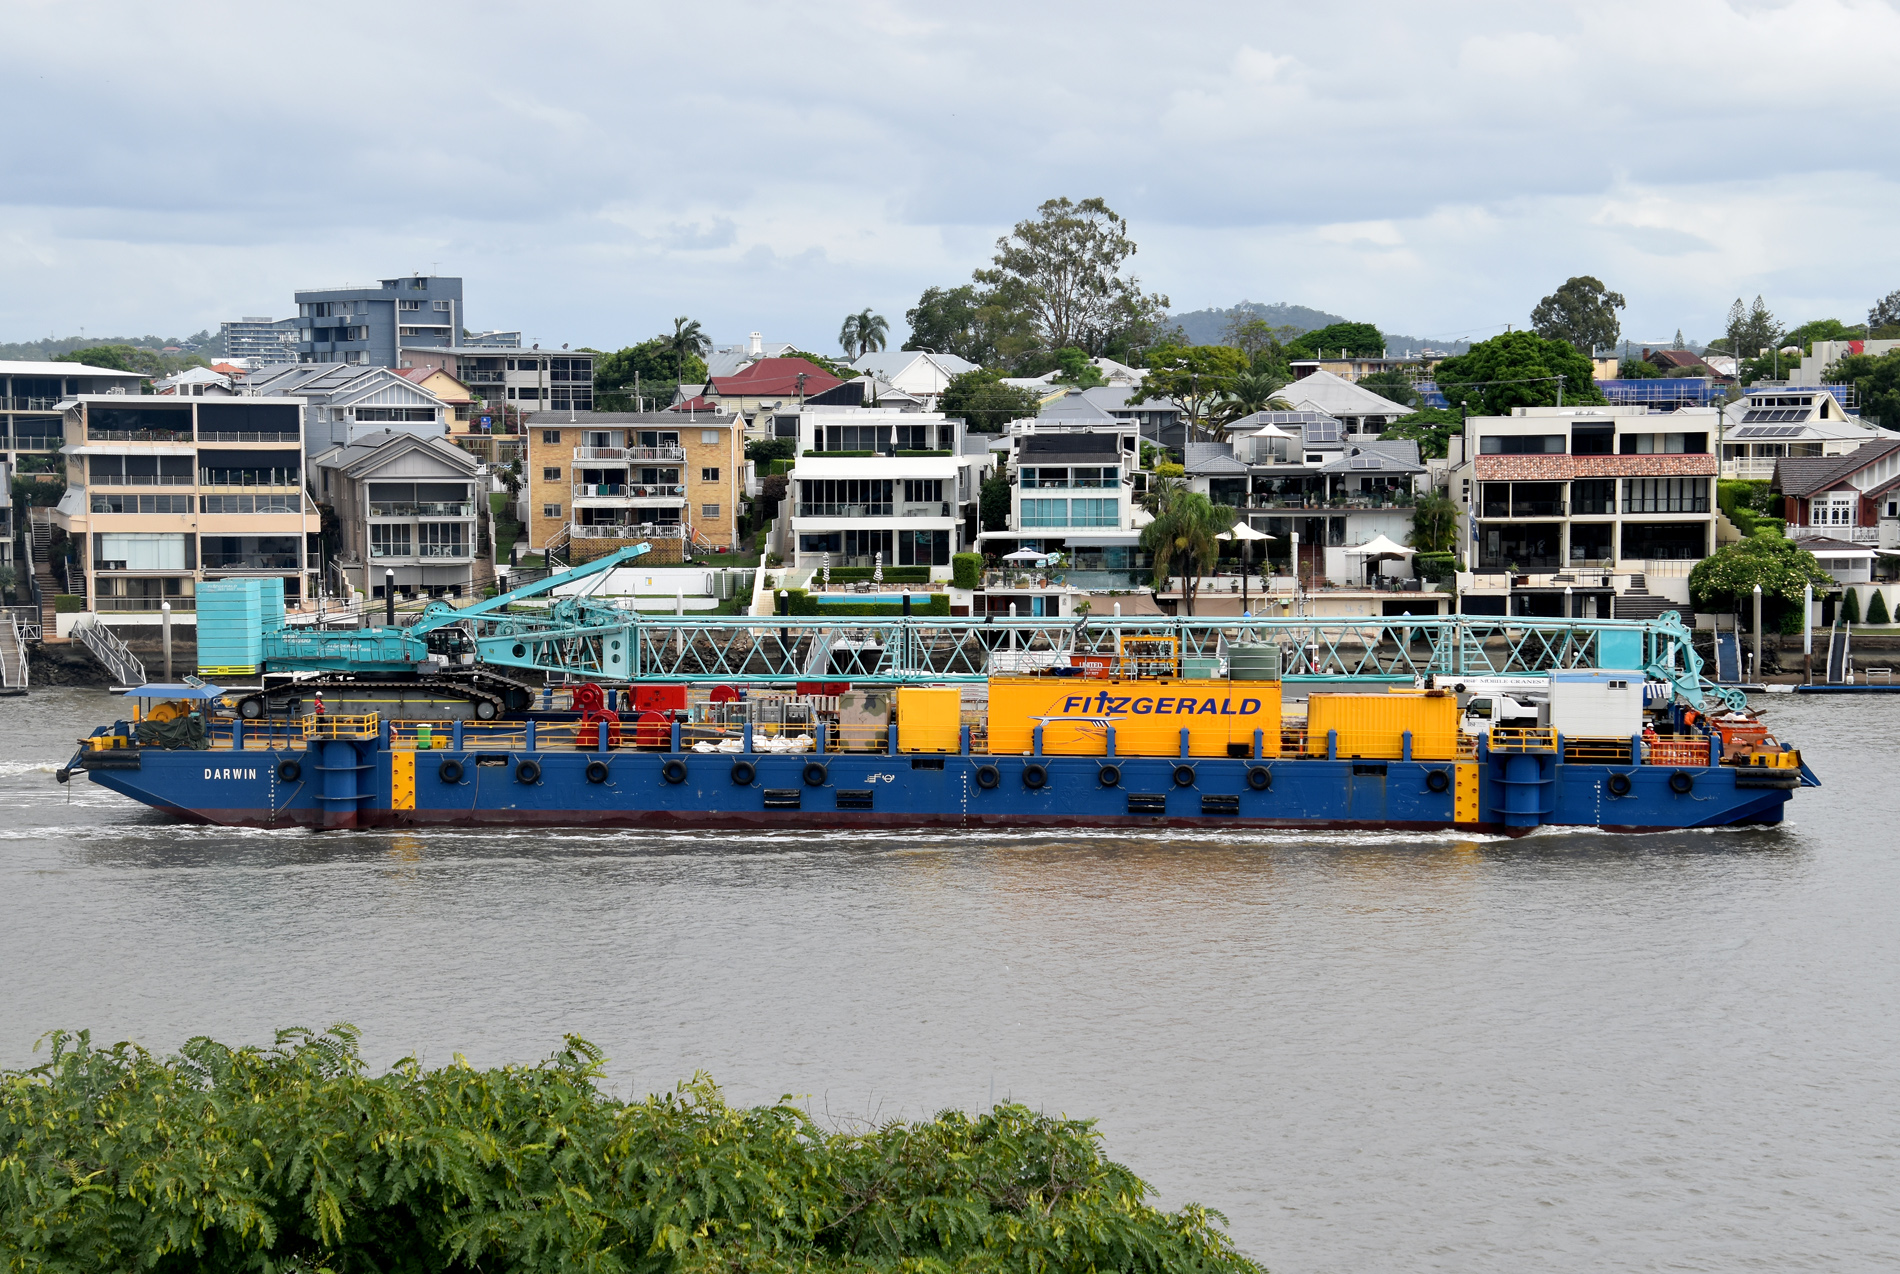 “PT Mary” takes a fully loaded “Darwin” up to Southbank for Bridge Project ~ 11 Jan 2021